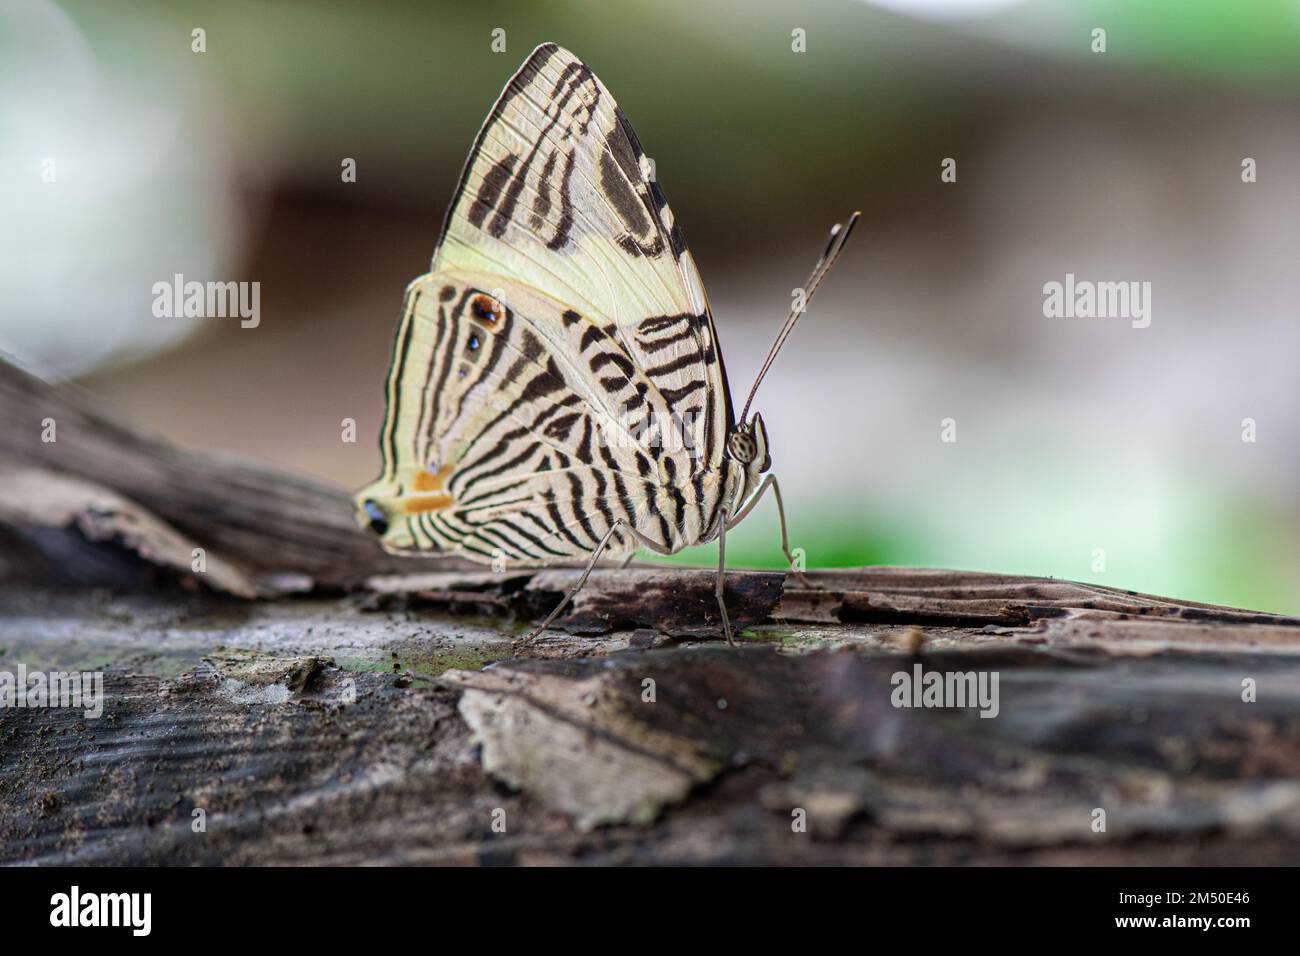 A closeup shot of a Colobura dirce butterfly with zebra mosaic wings, on a tree branch with a blurred background Stock Photo